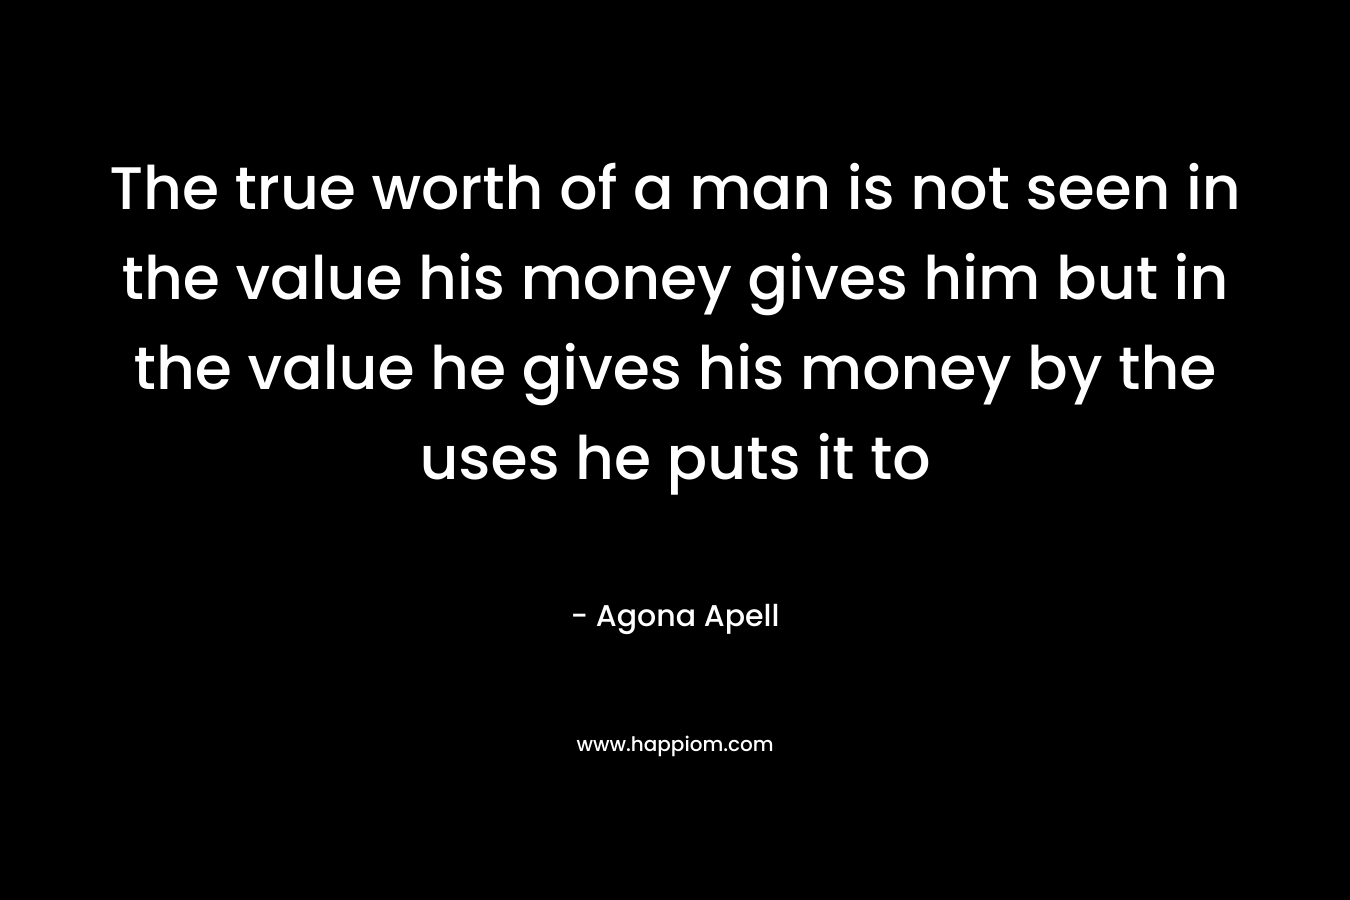 The true worth of a man is not seen in the value his money gives him but in the value he gives his money by the uses he puts it to